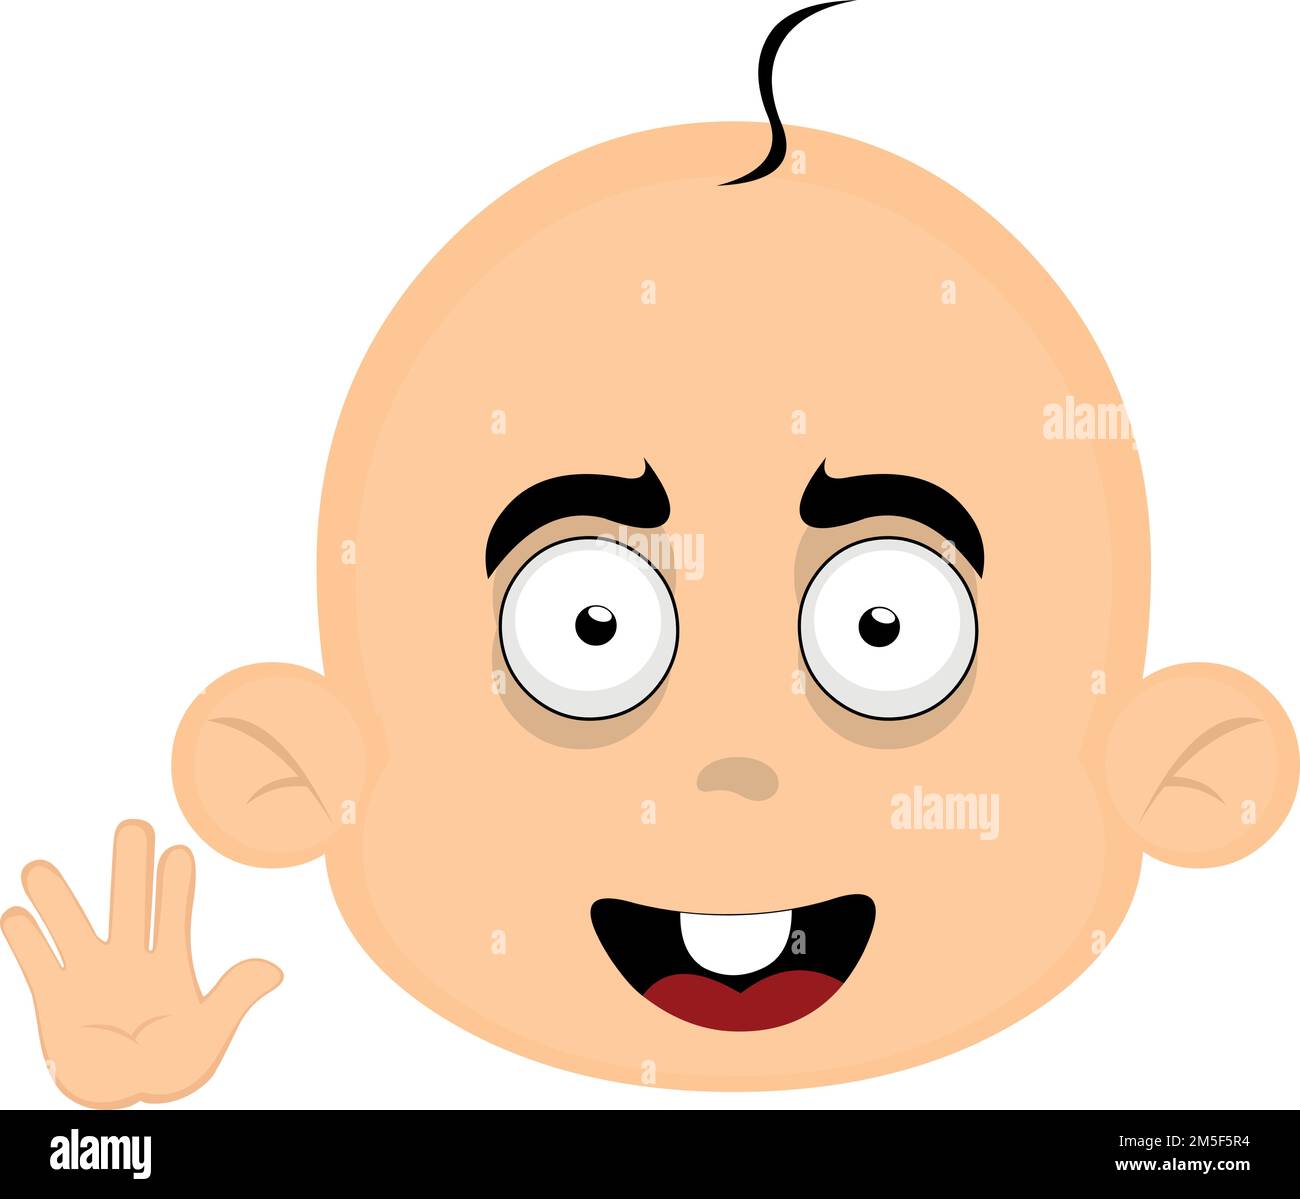 vector illustration of the face of a baby cartoon with a cheerful expression and making the classic vulcan greeting Stock Vector